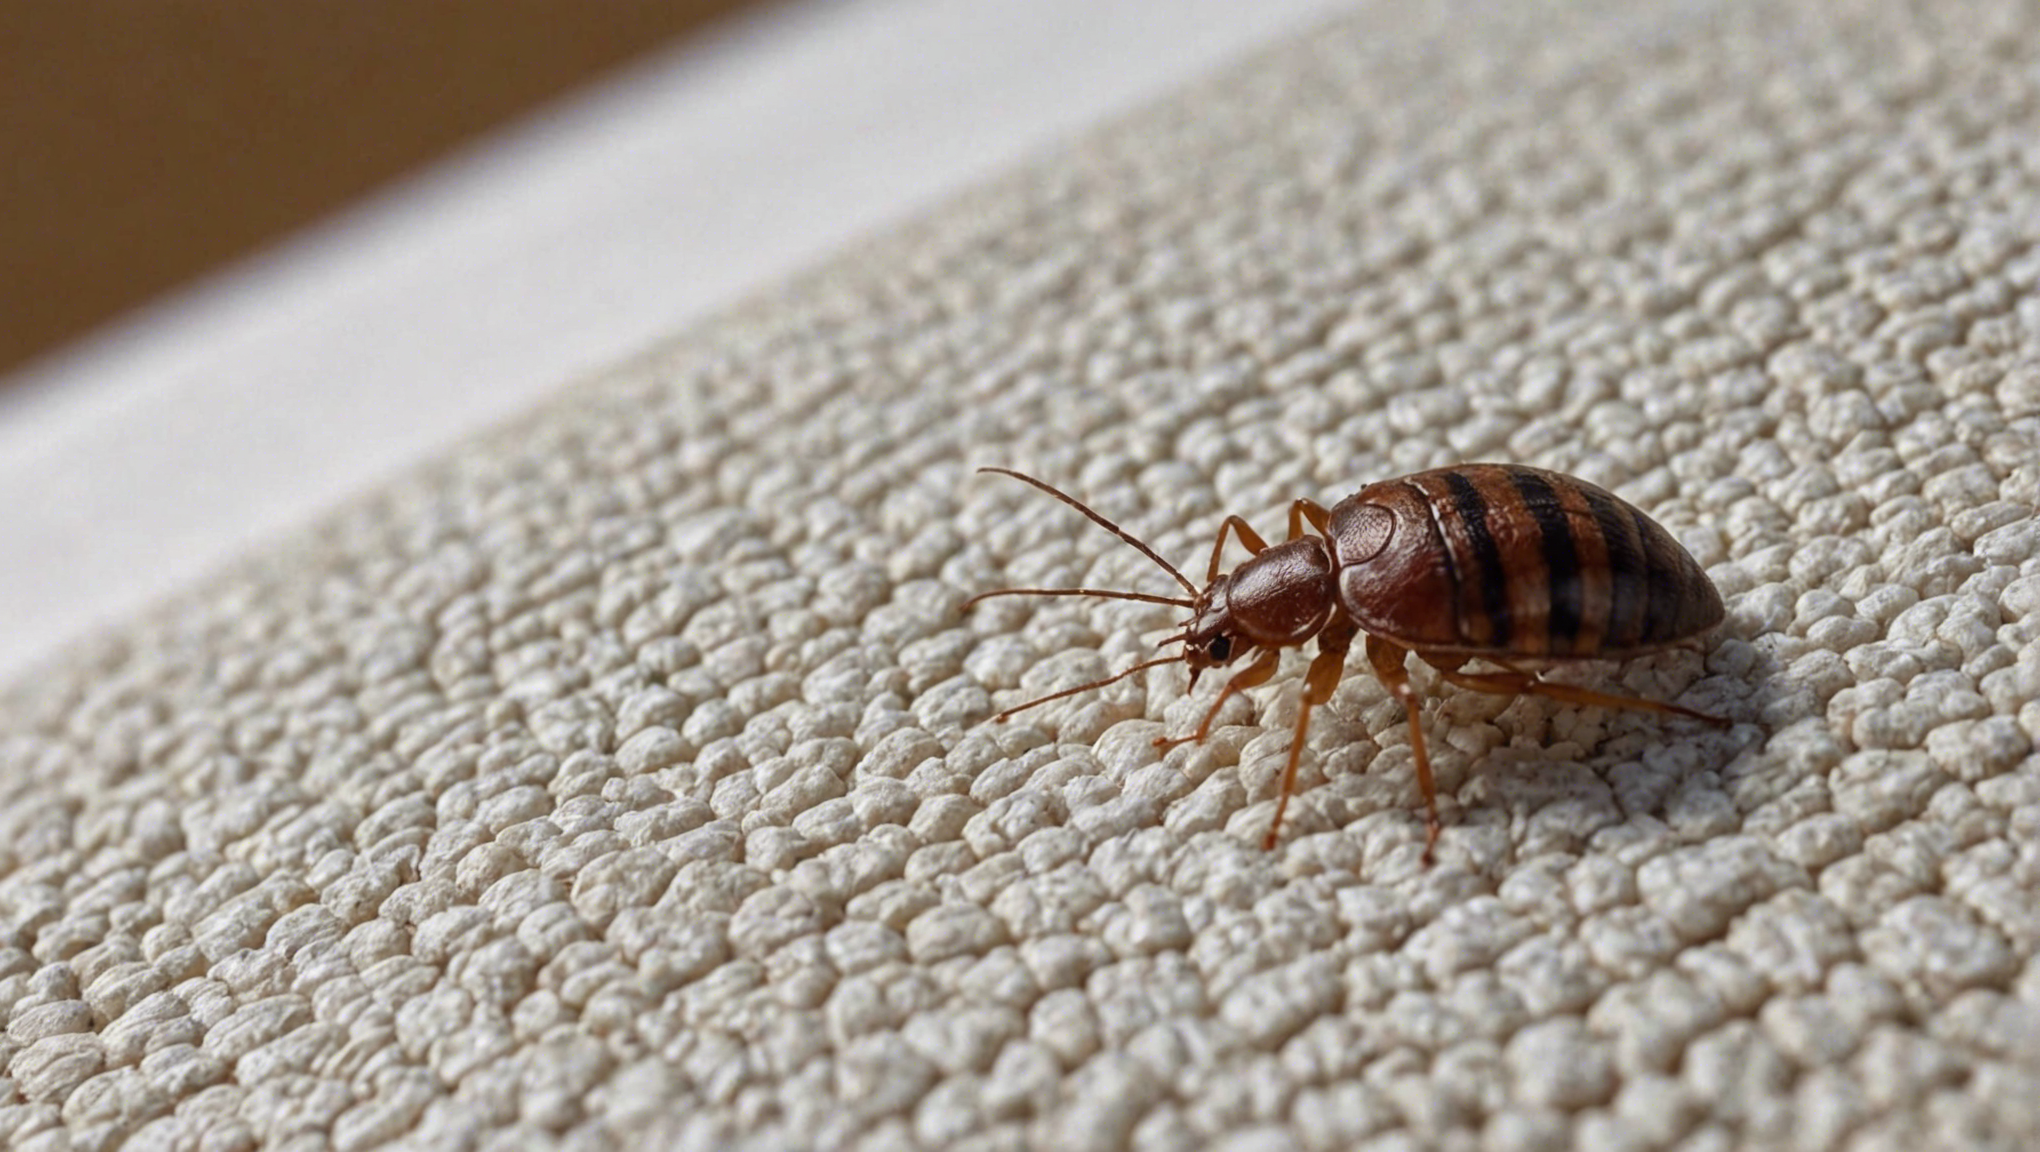 learn effective strategies to avoid bringing bed bugs home when traveling with this comprehensive guide on preventing bed bug infestations during your trips.